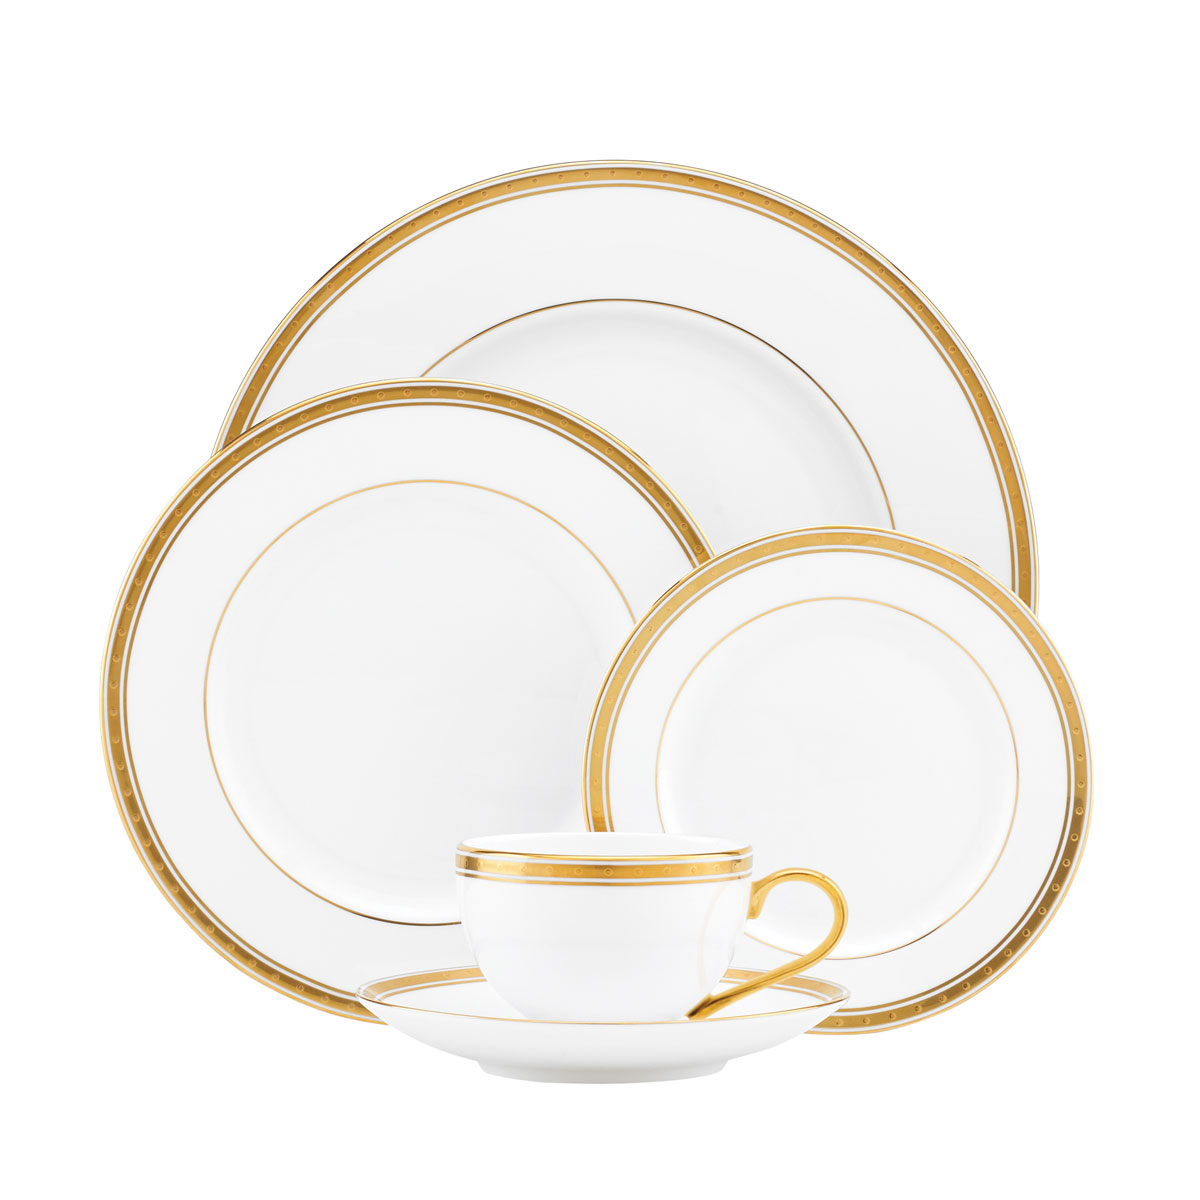 Kate Spade New York, Lenox Oxford Place, 5 Piece Place Setting